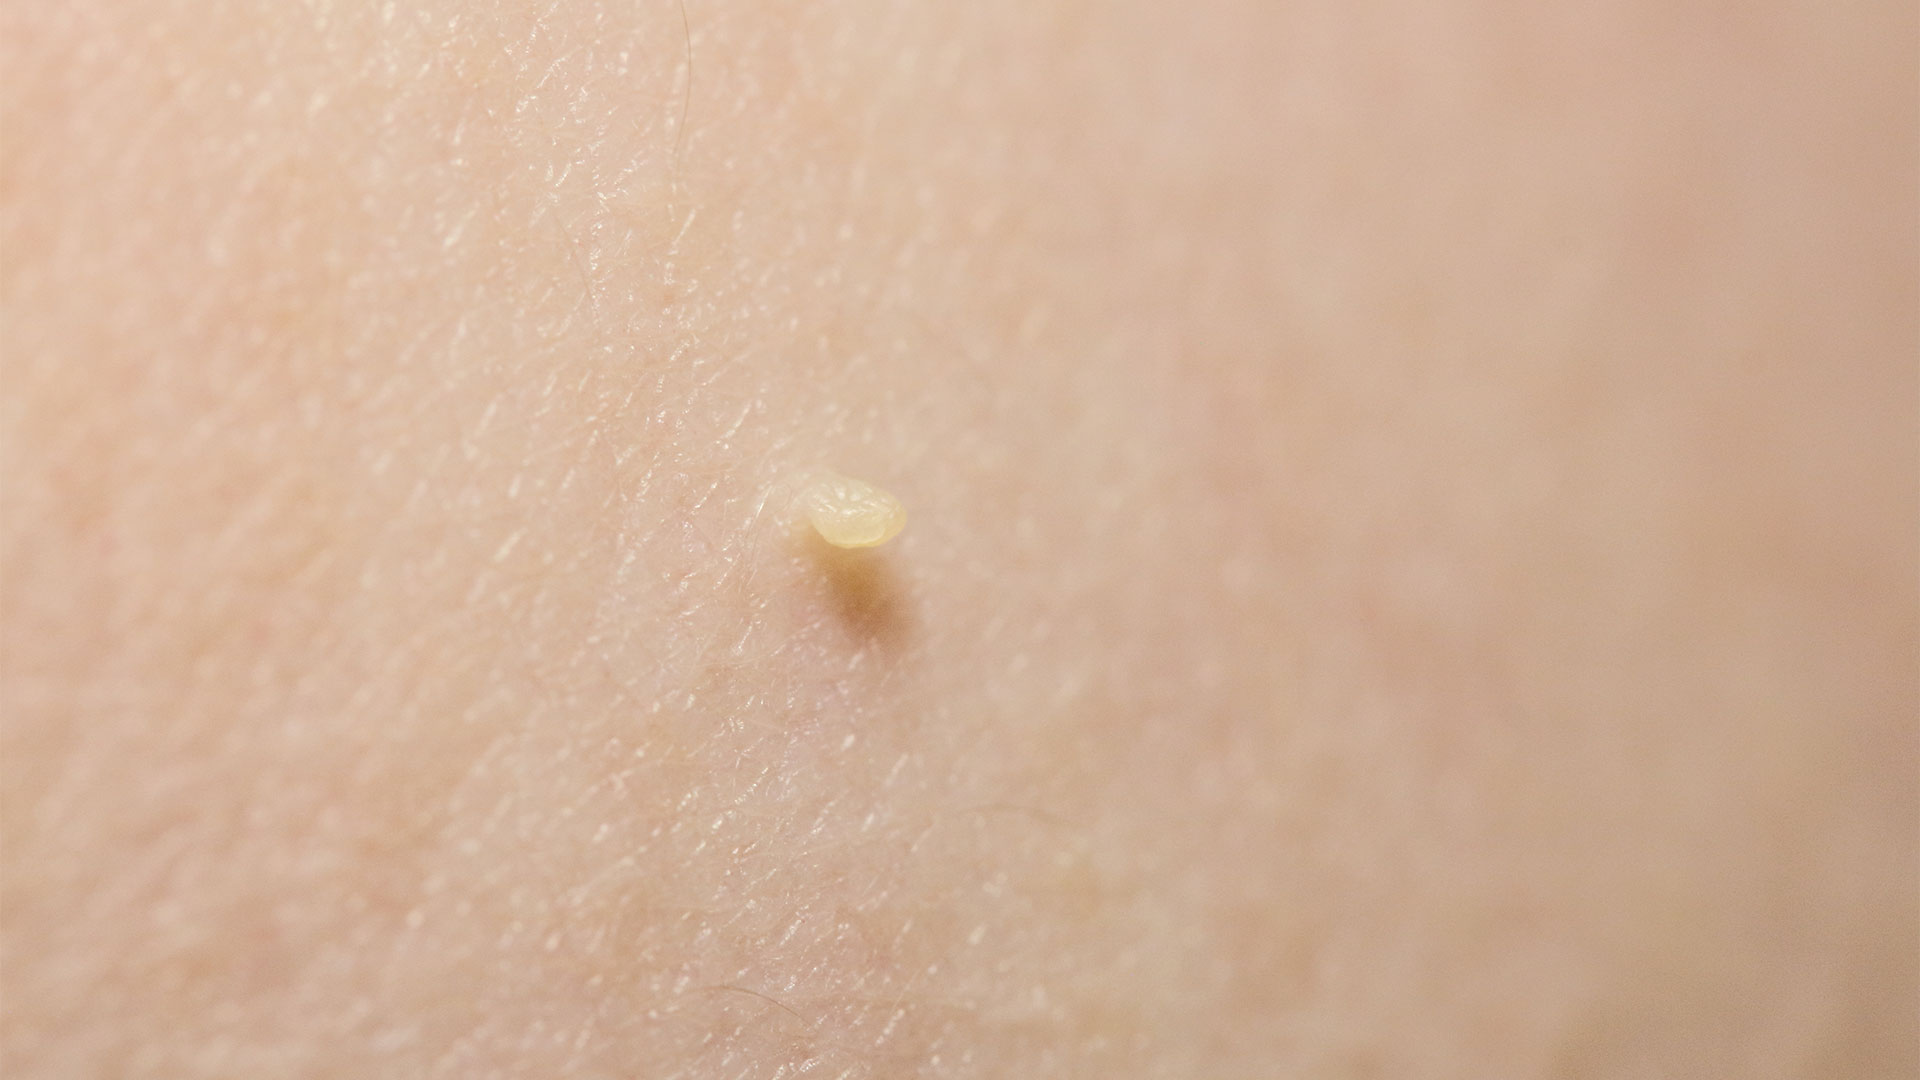 Skin tags are small, soft, painless, non-cancerous growth that usually forms within the skin folds